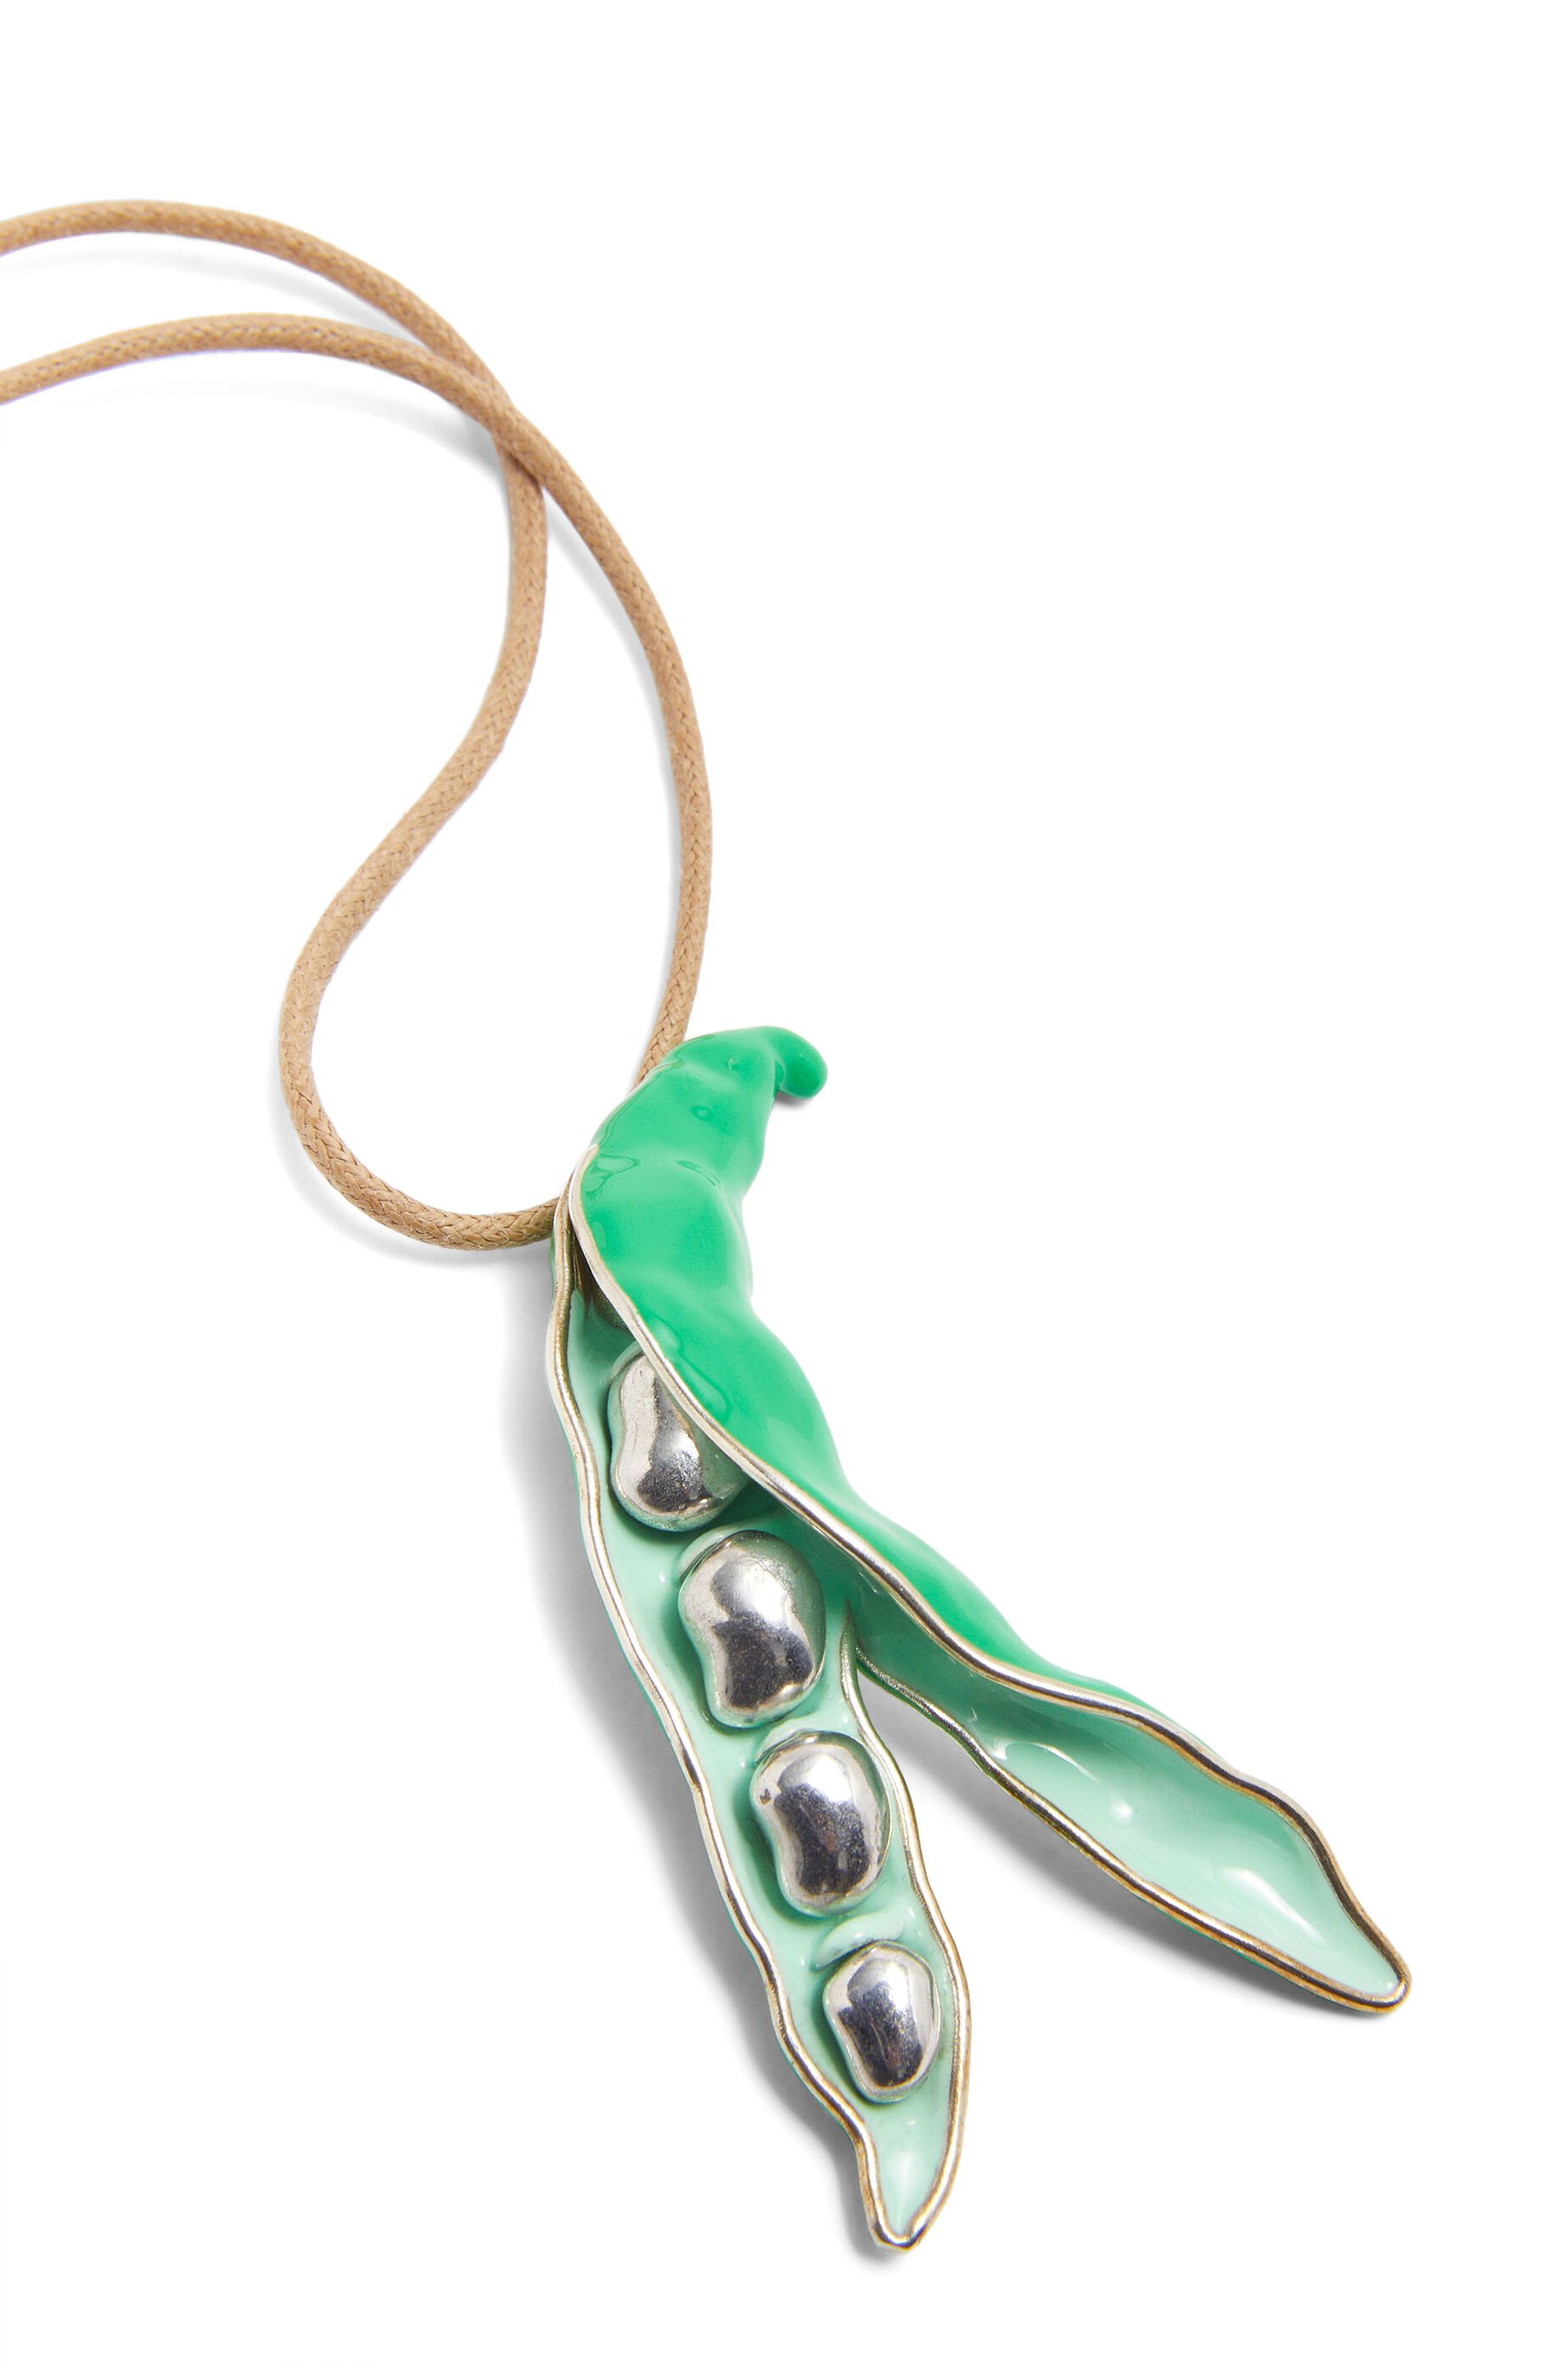 Fava bean pendant necklace in sterling silver and enamel